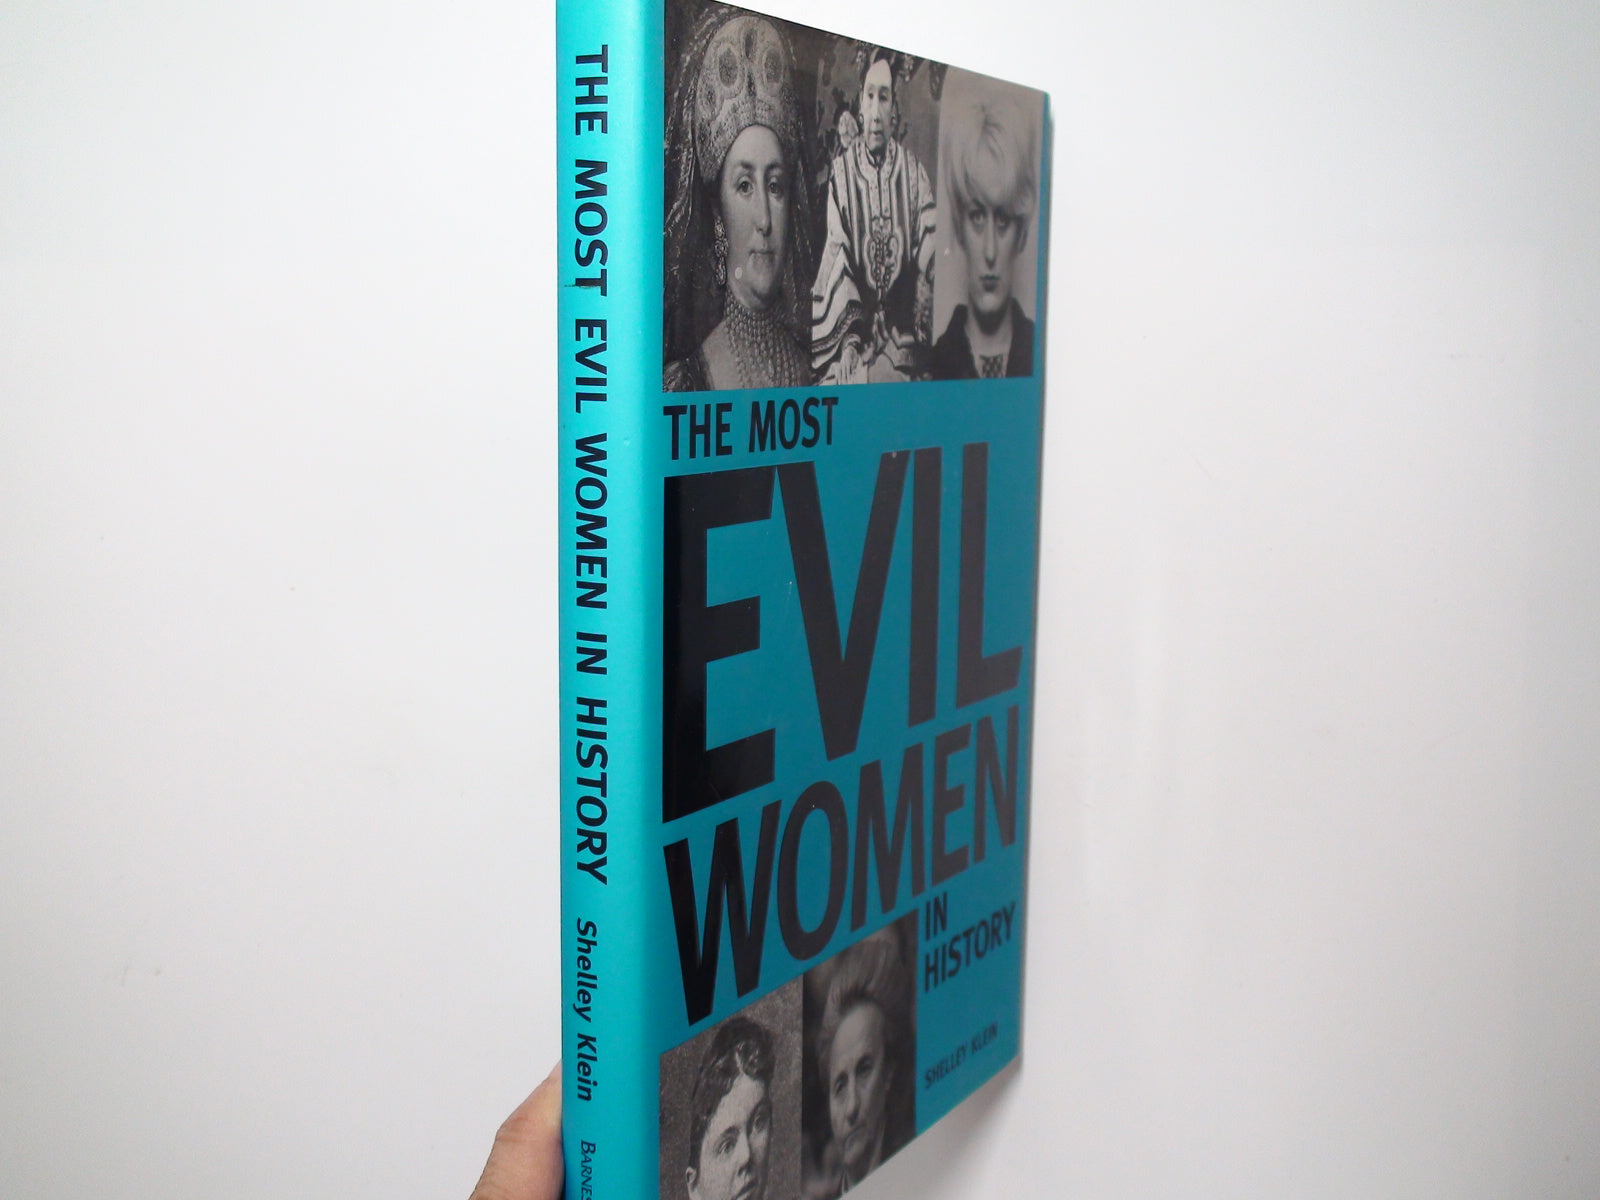 The Most Evil Women in History, by Shelley Kline, 1st Ed, Illustrated